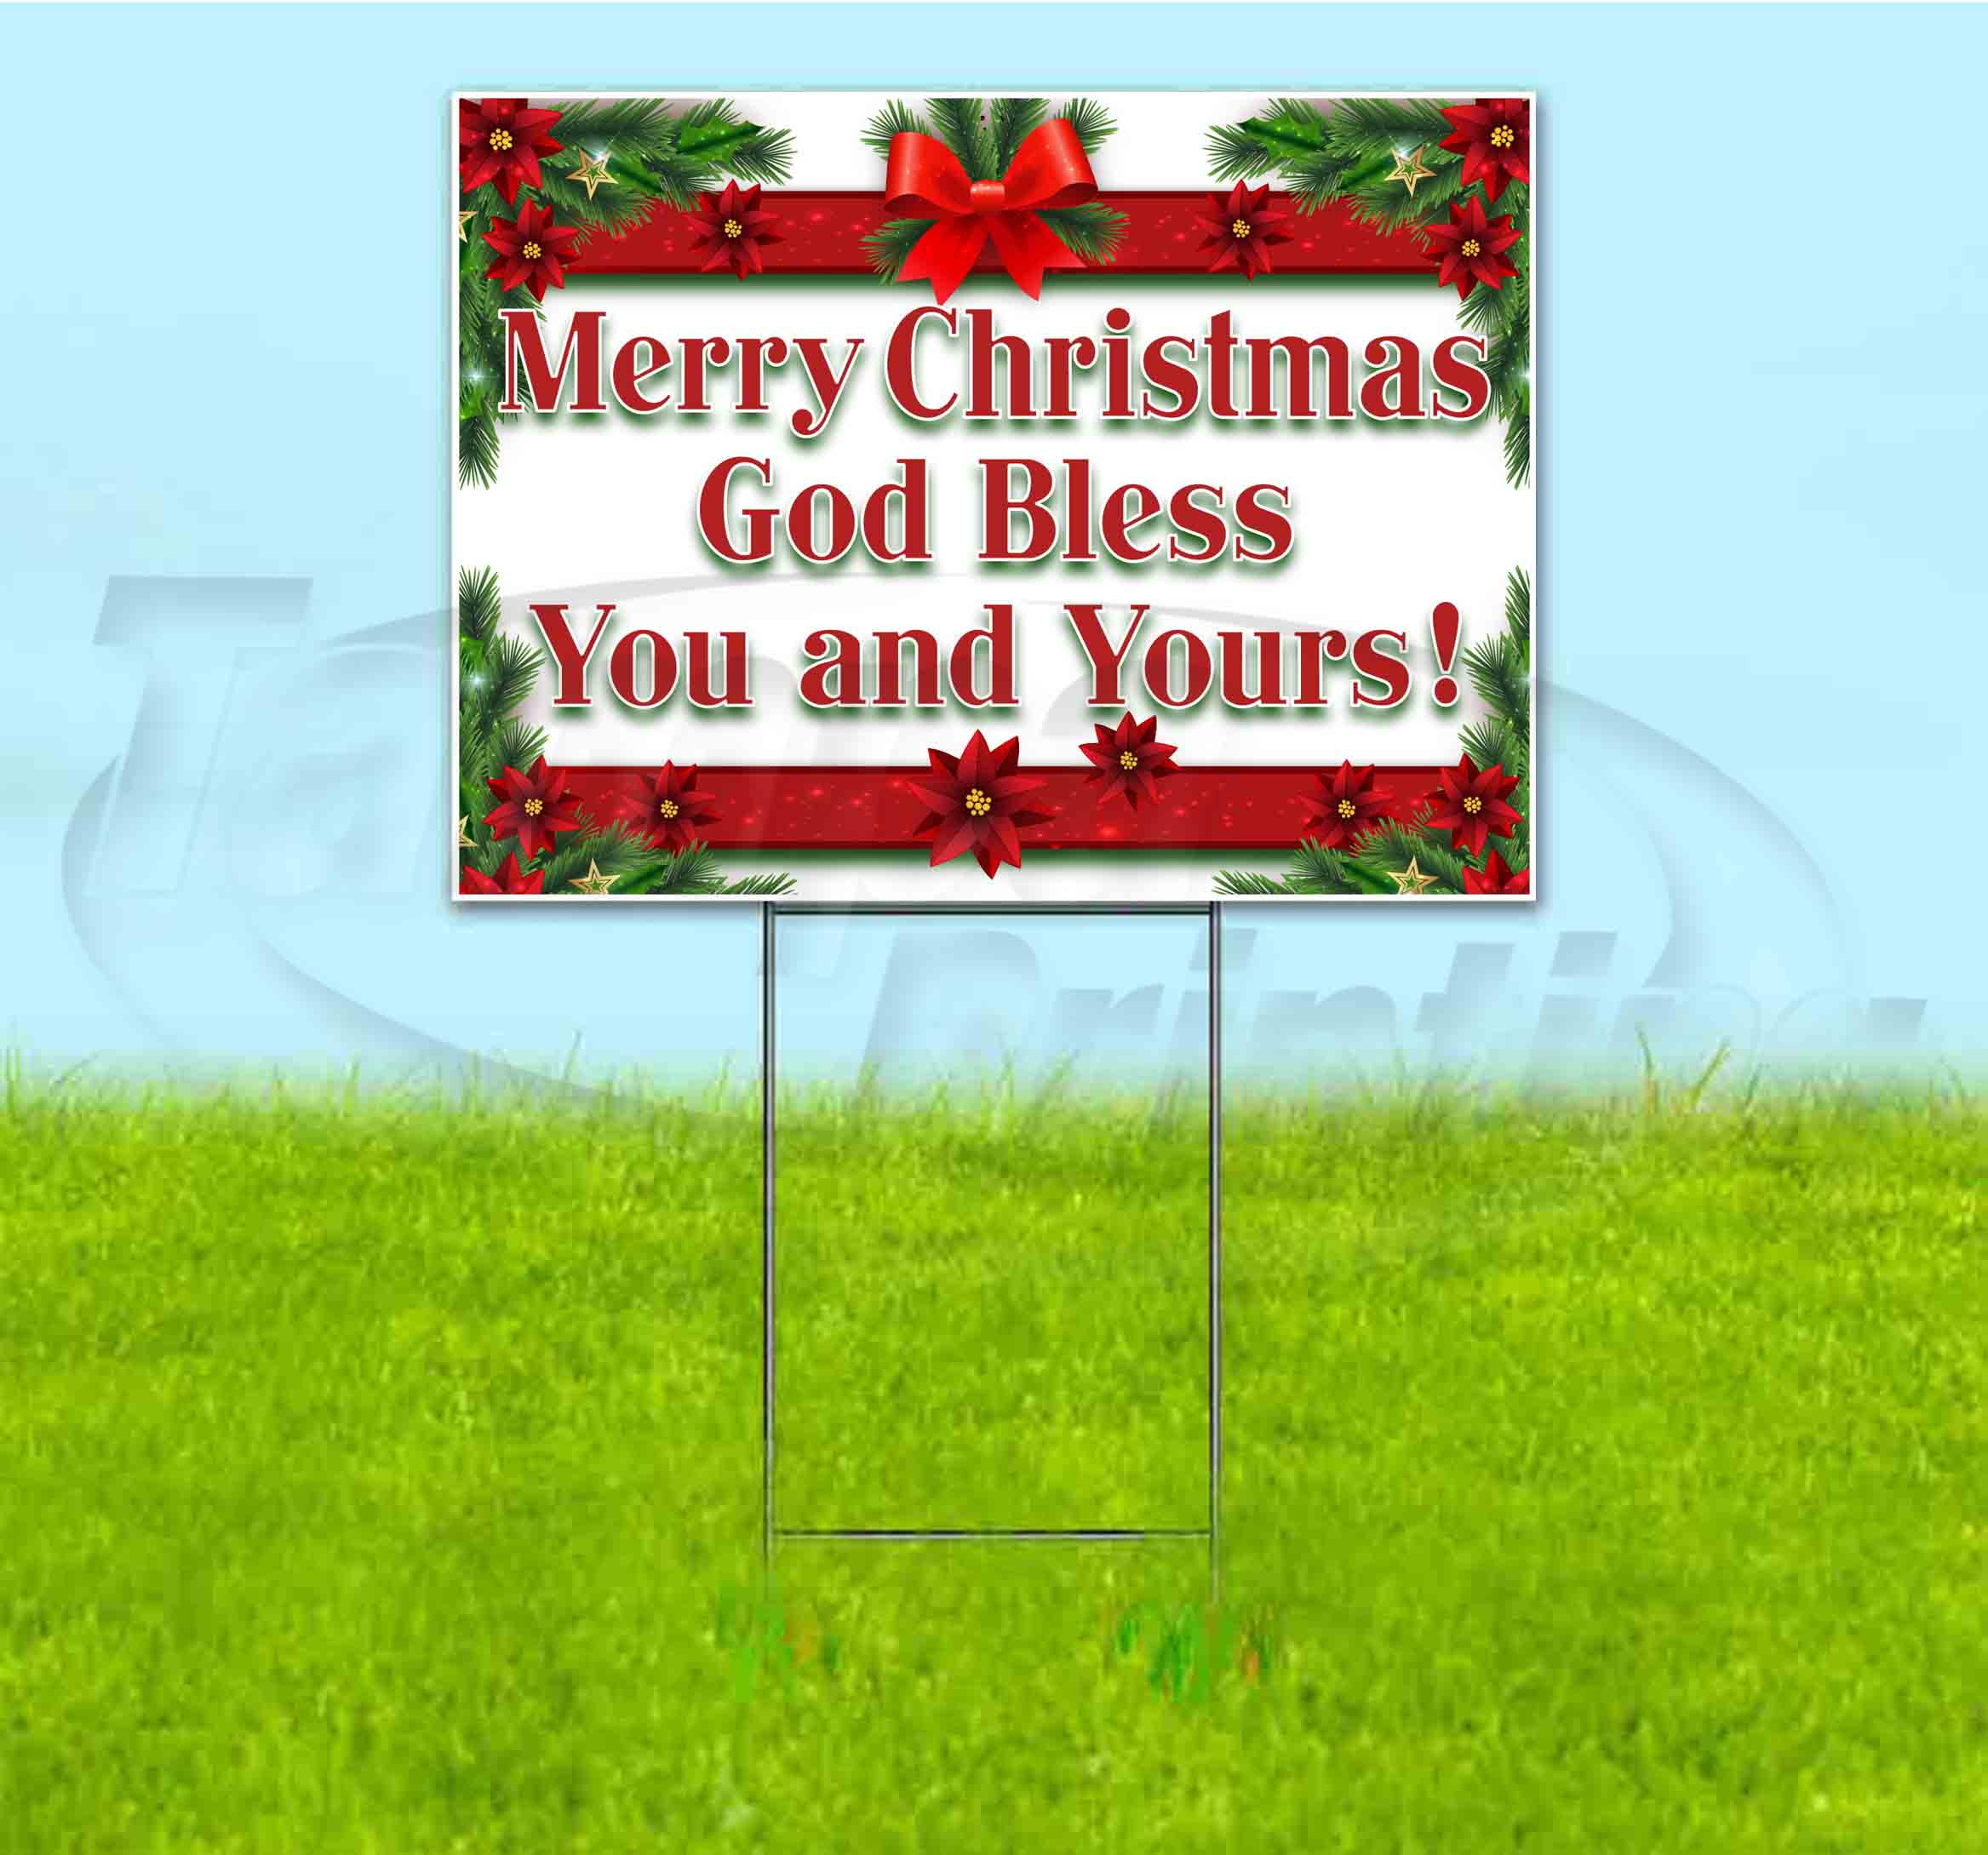 MERRY CHRISTMAS GOD BLESS YOU AND YOURS Advertising Vinyl Banner Flag Sign 